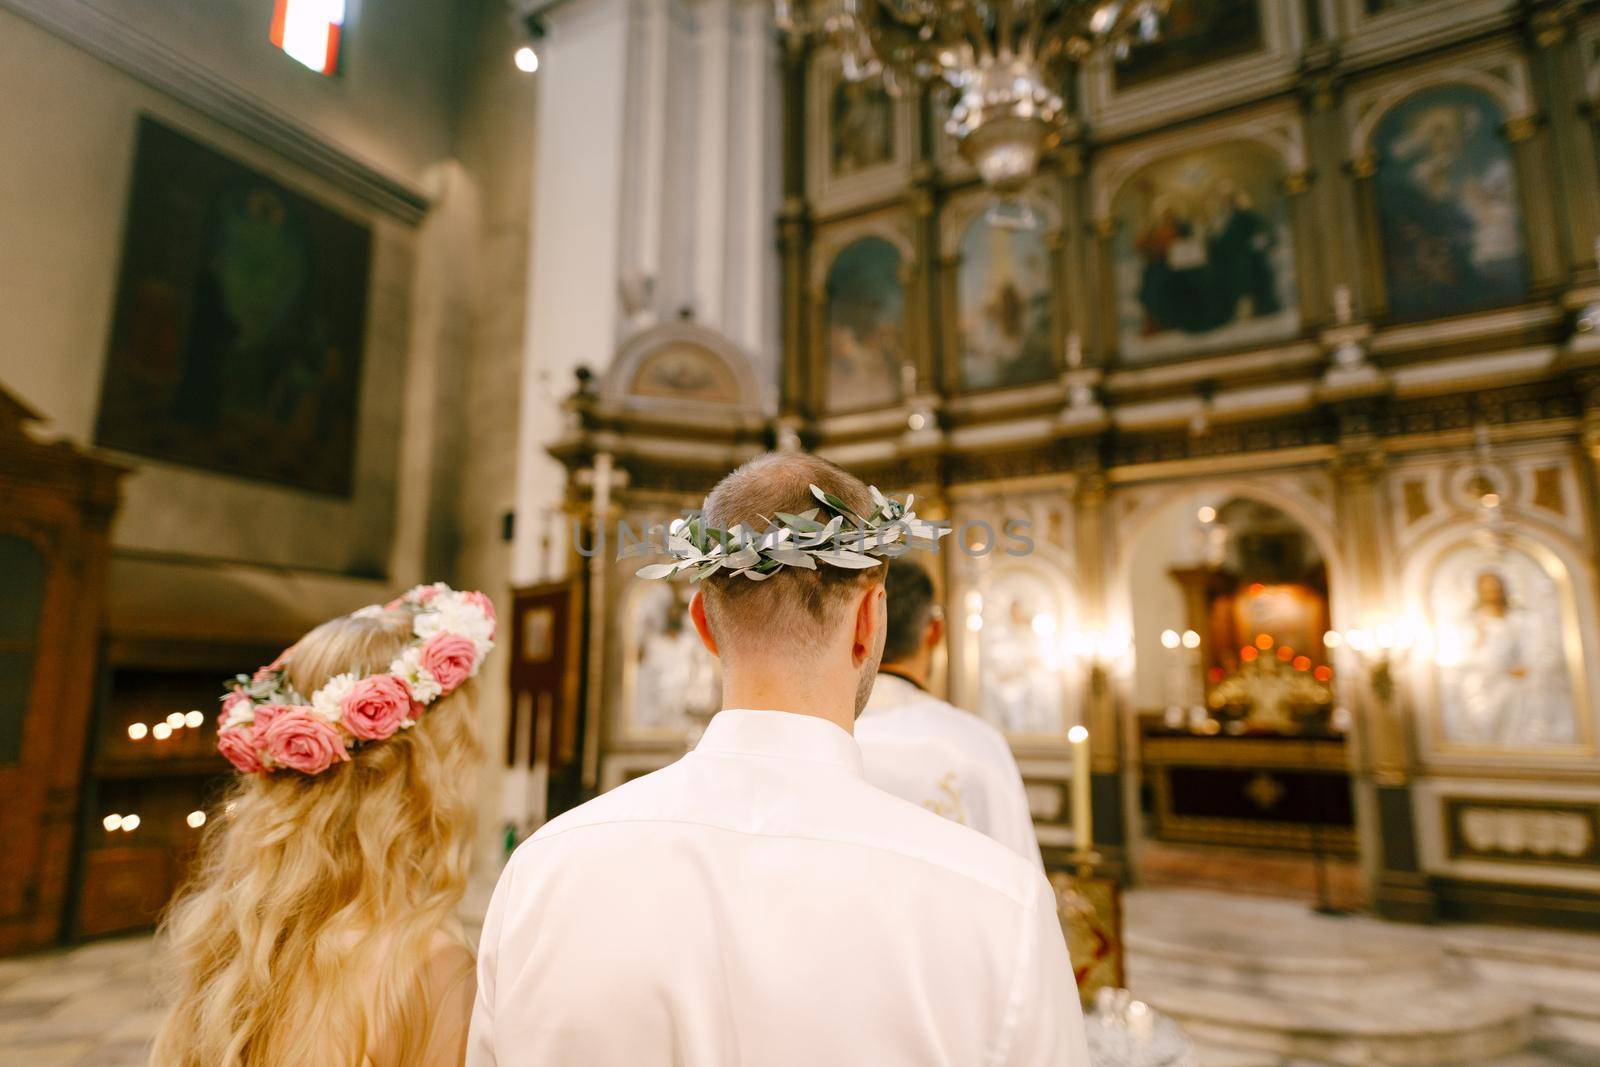 Budva, Montenegro - 21 august 2020: The priest, the groom and the bride in wreaths stand at the altar of the Church of St. Nicholas in Kotor during the wedding, back view by Nadtochiy